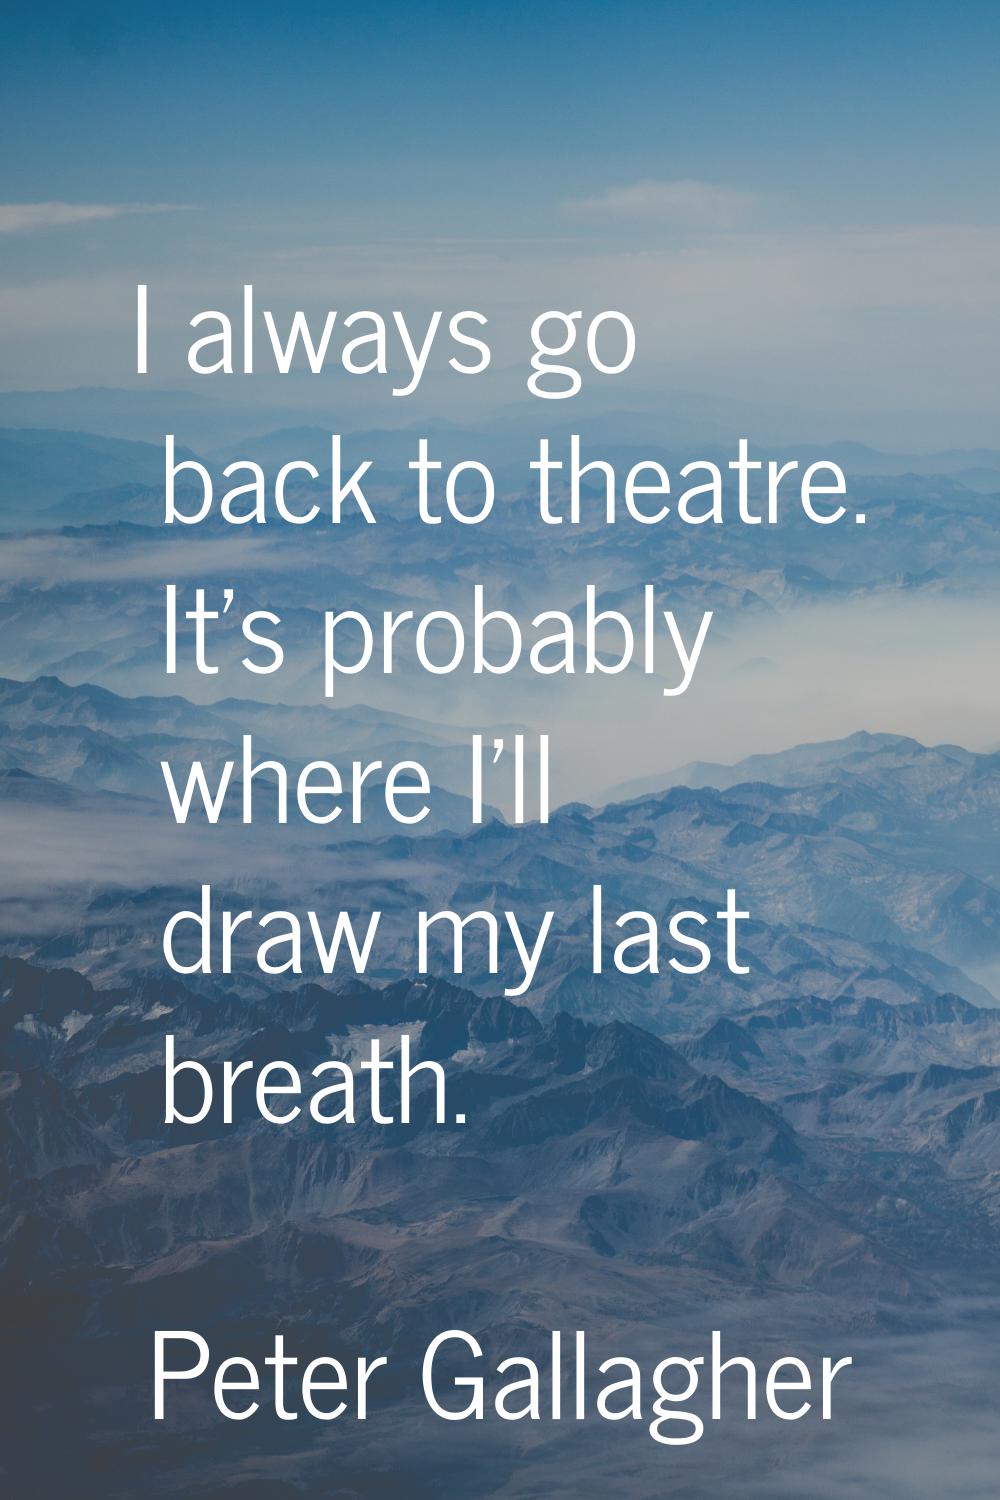 I always go back to theatre. It's probably where I'll draw my last breath.